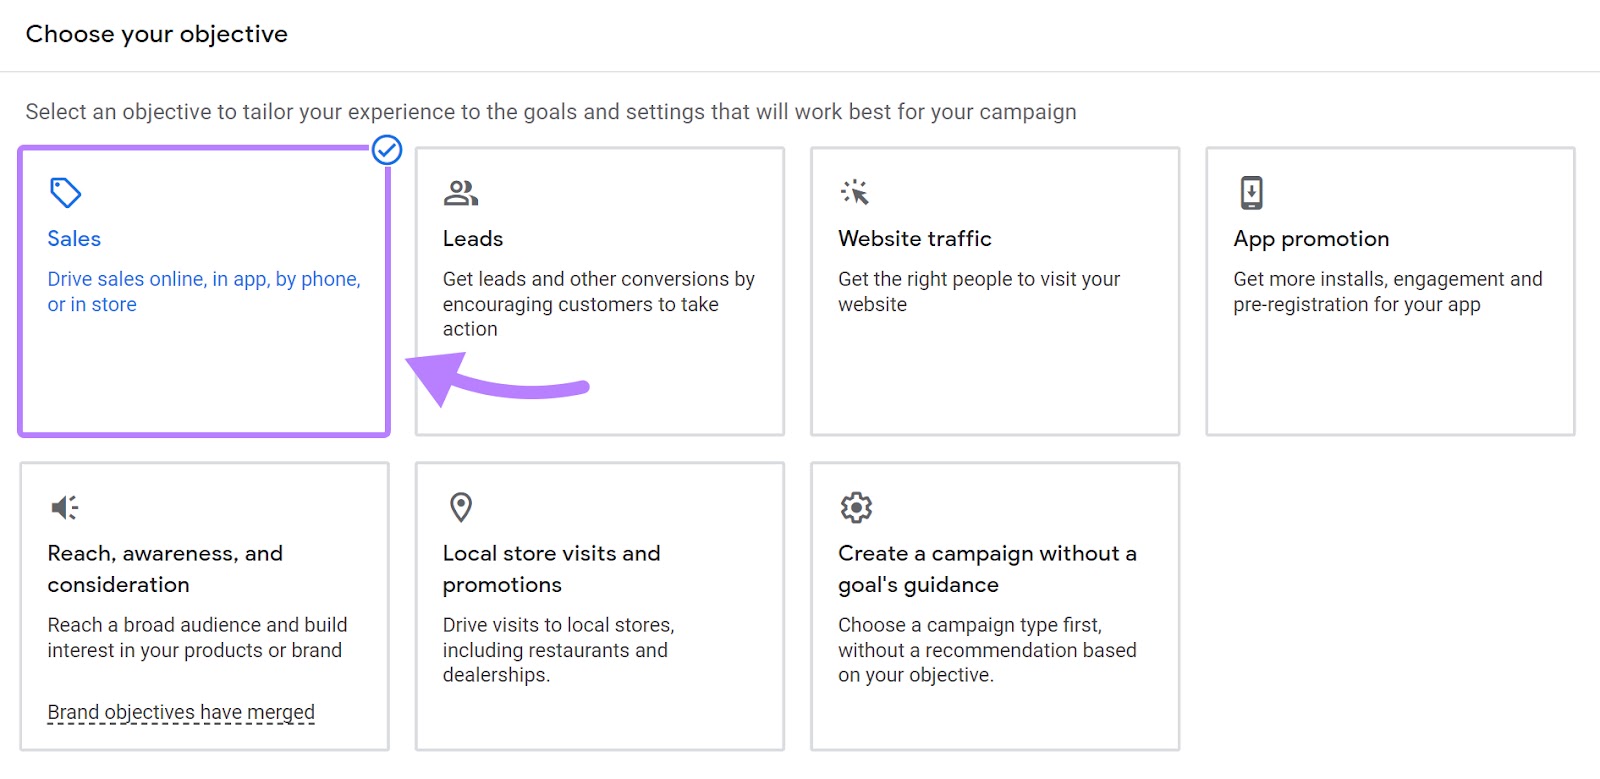 "Sales" option selected under Google Ads' campaign objective